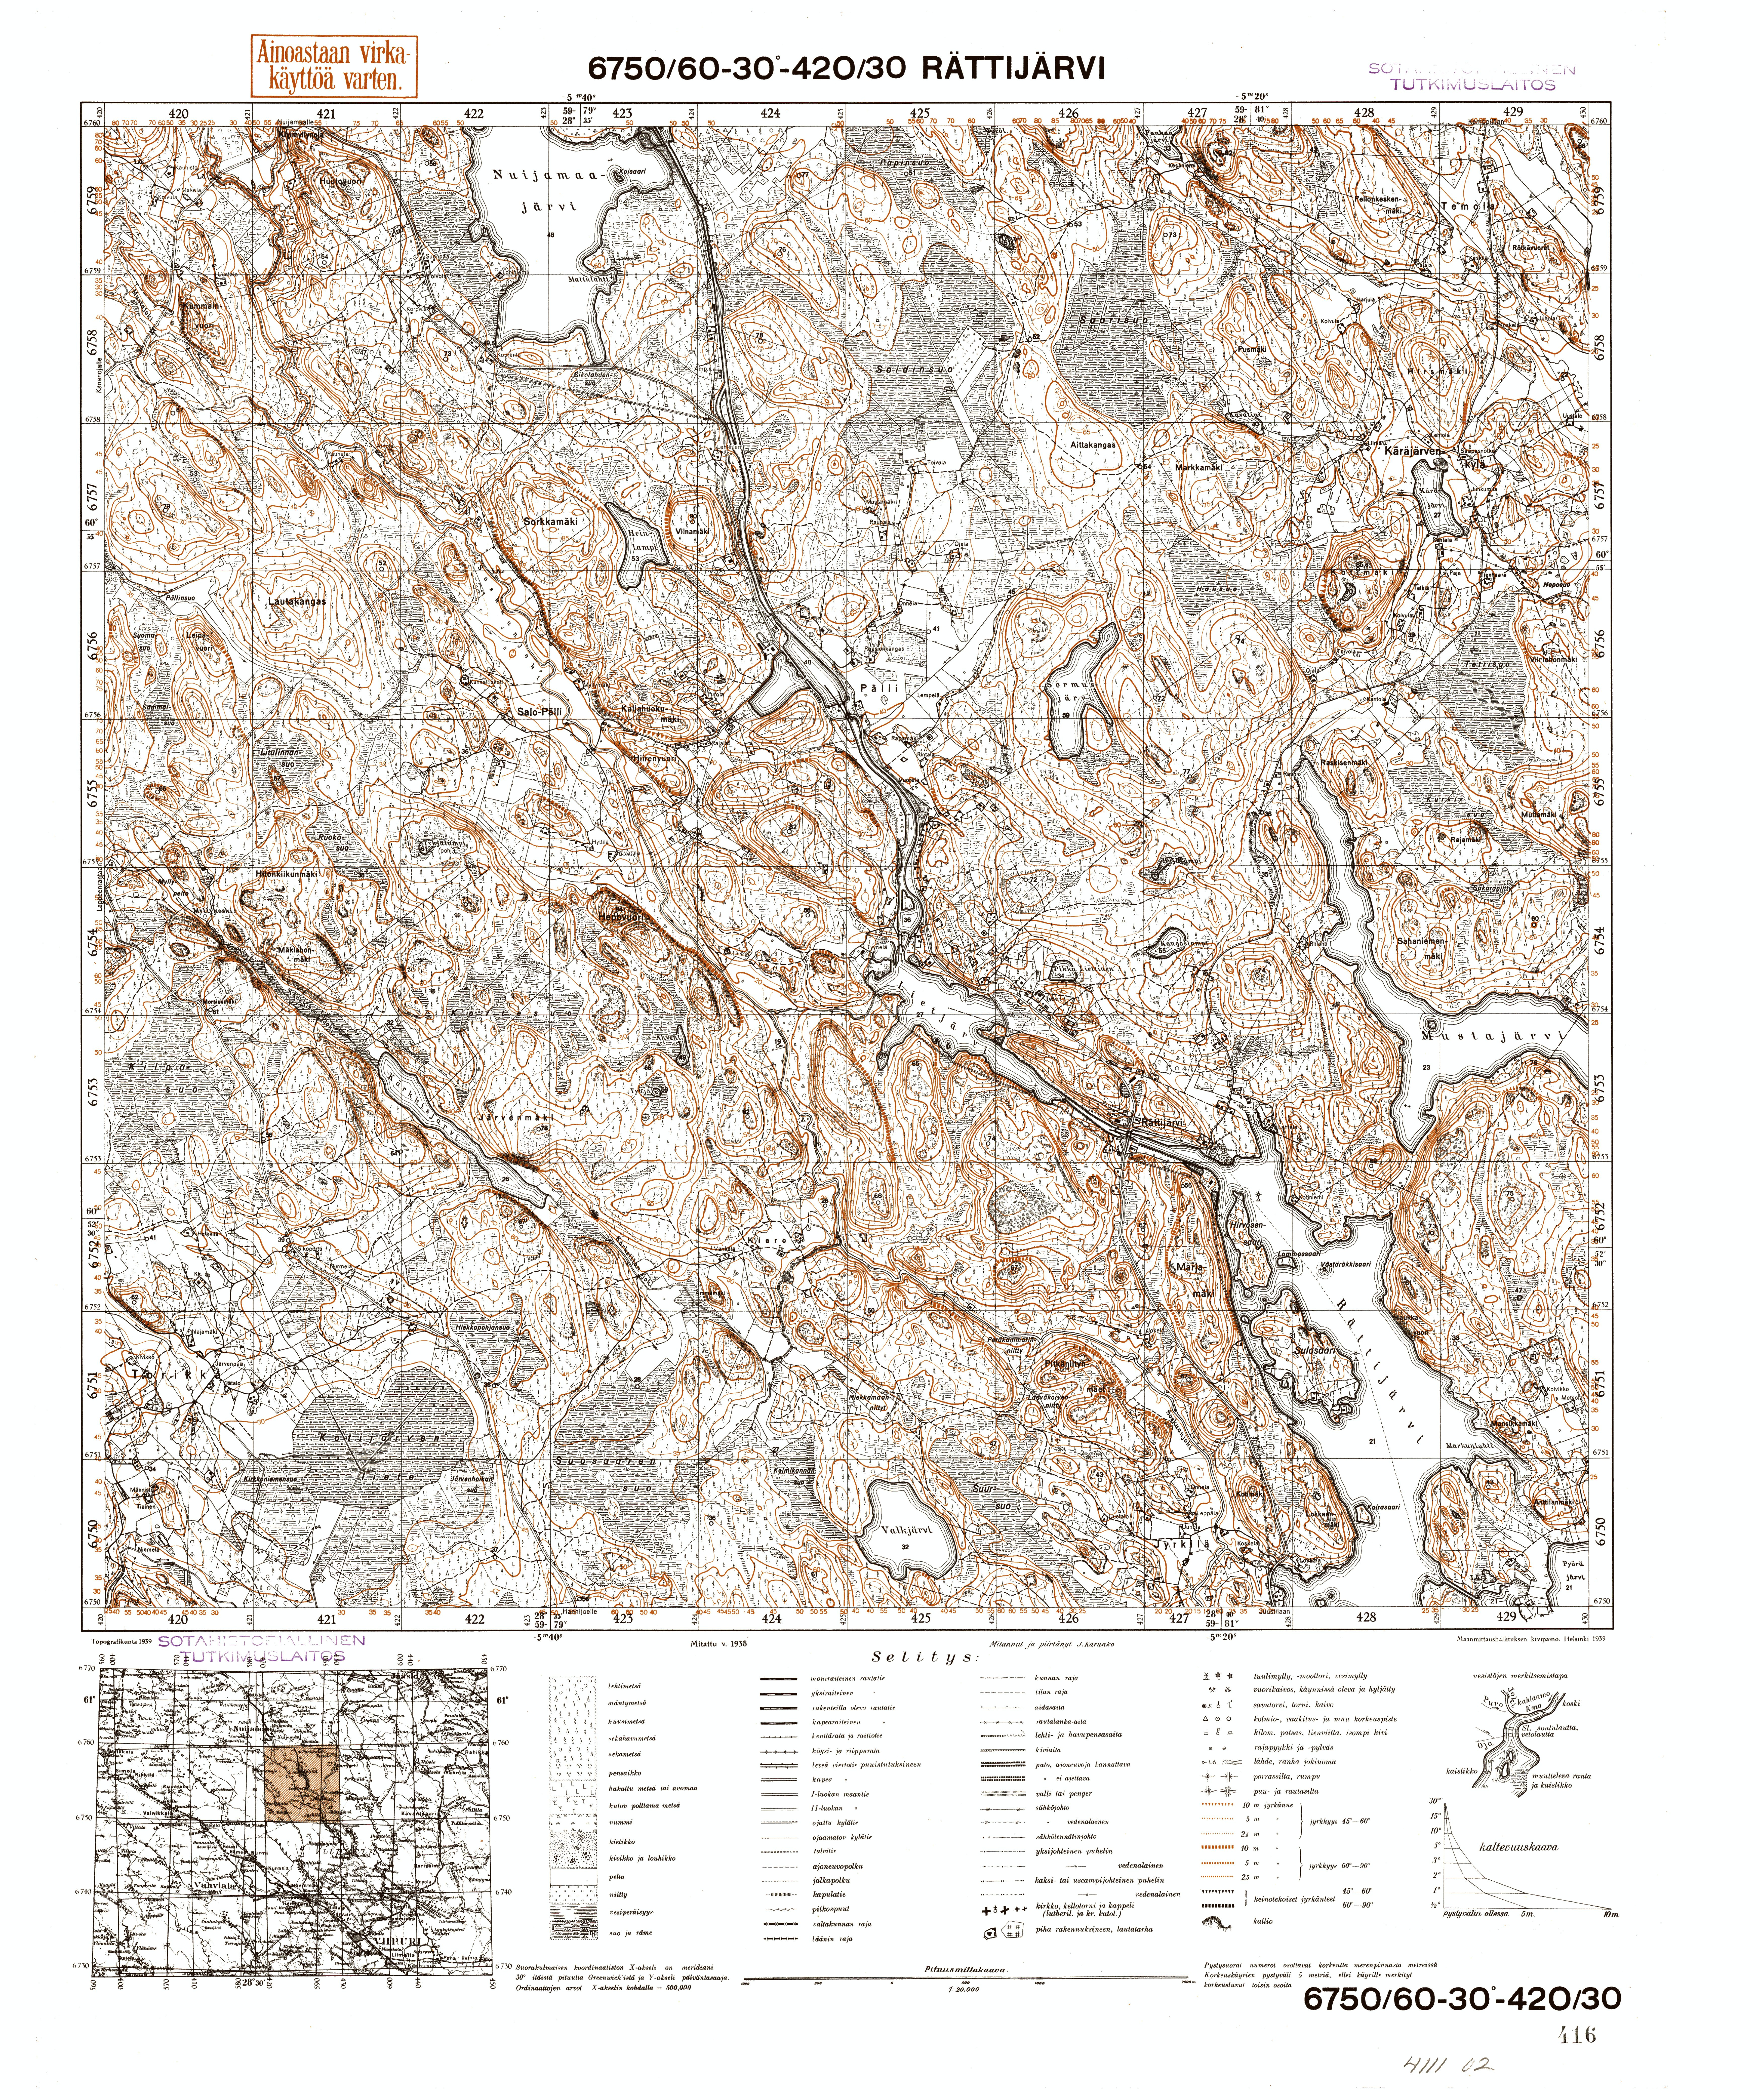 Bolšoje Tsvetotšnoje Lake. Rättijärvi. Topografikartta 411102. Topographic map from 1934. Use the zooming tool to explore in higher level of detail. Obtain as a quality print or high resolution image